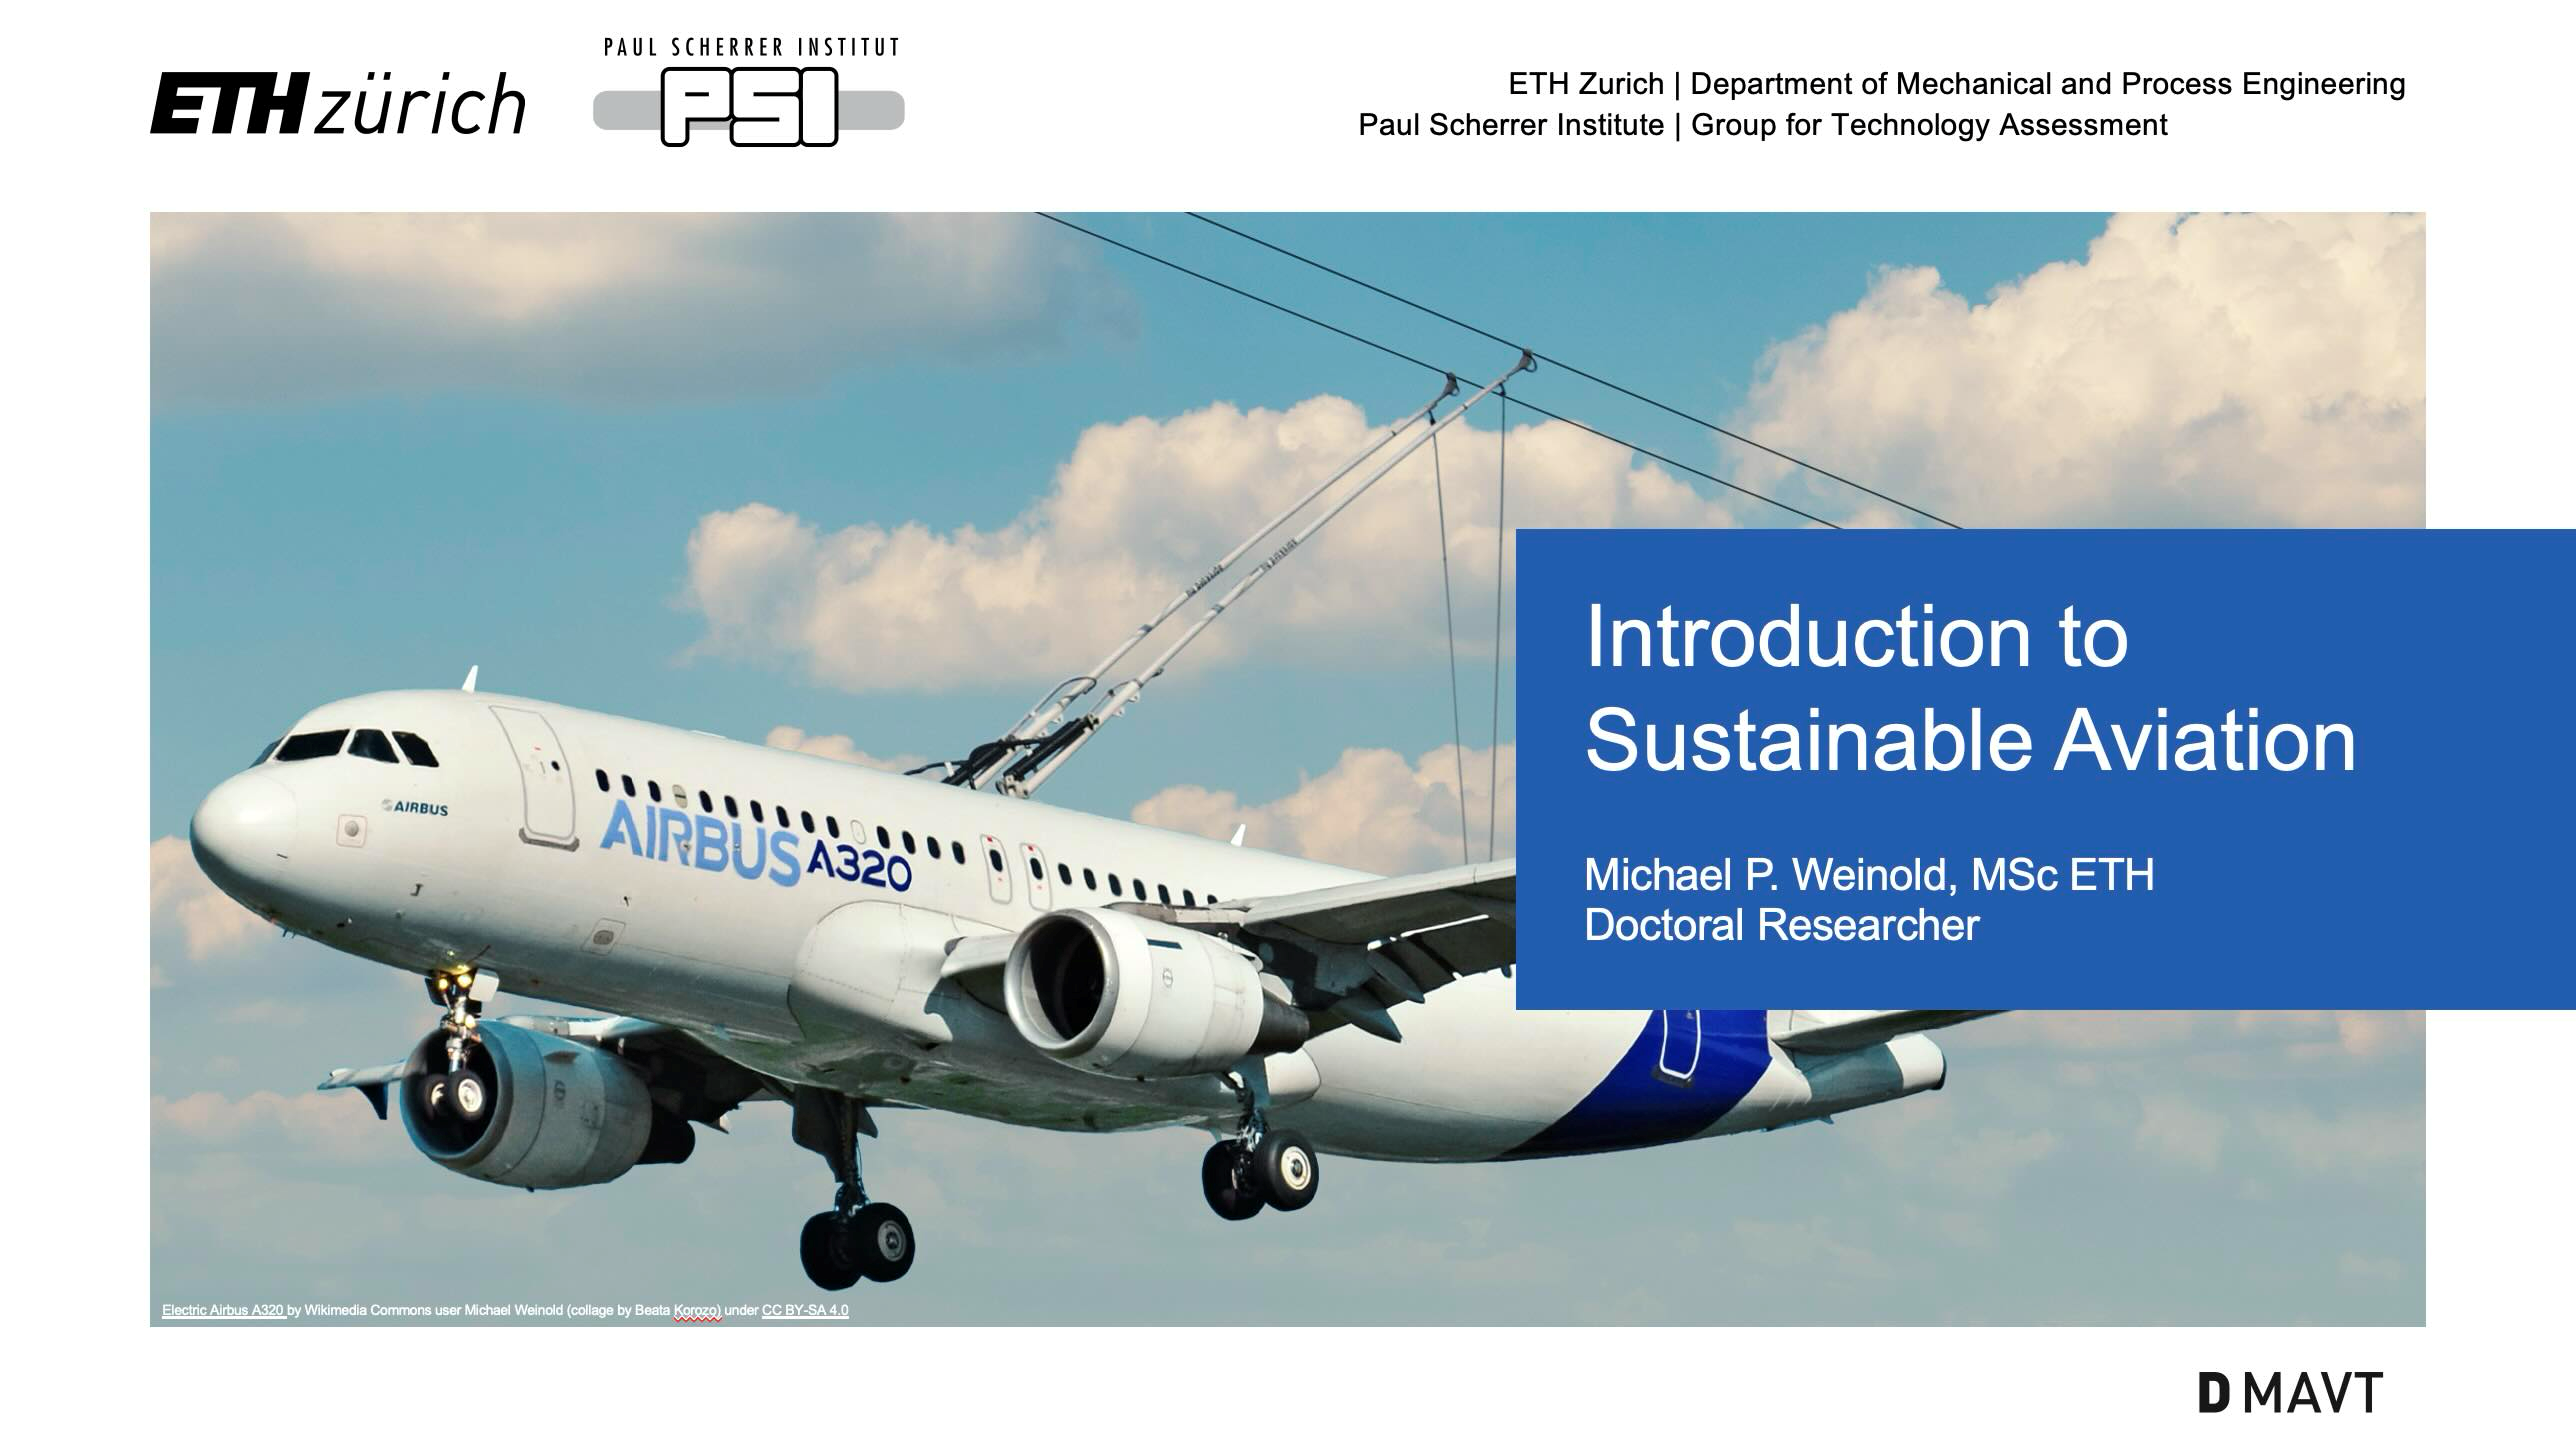 Introduction to Sustainable Aviation